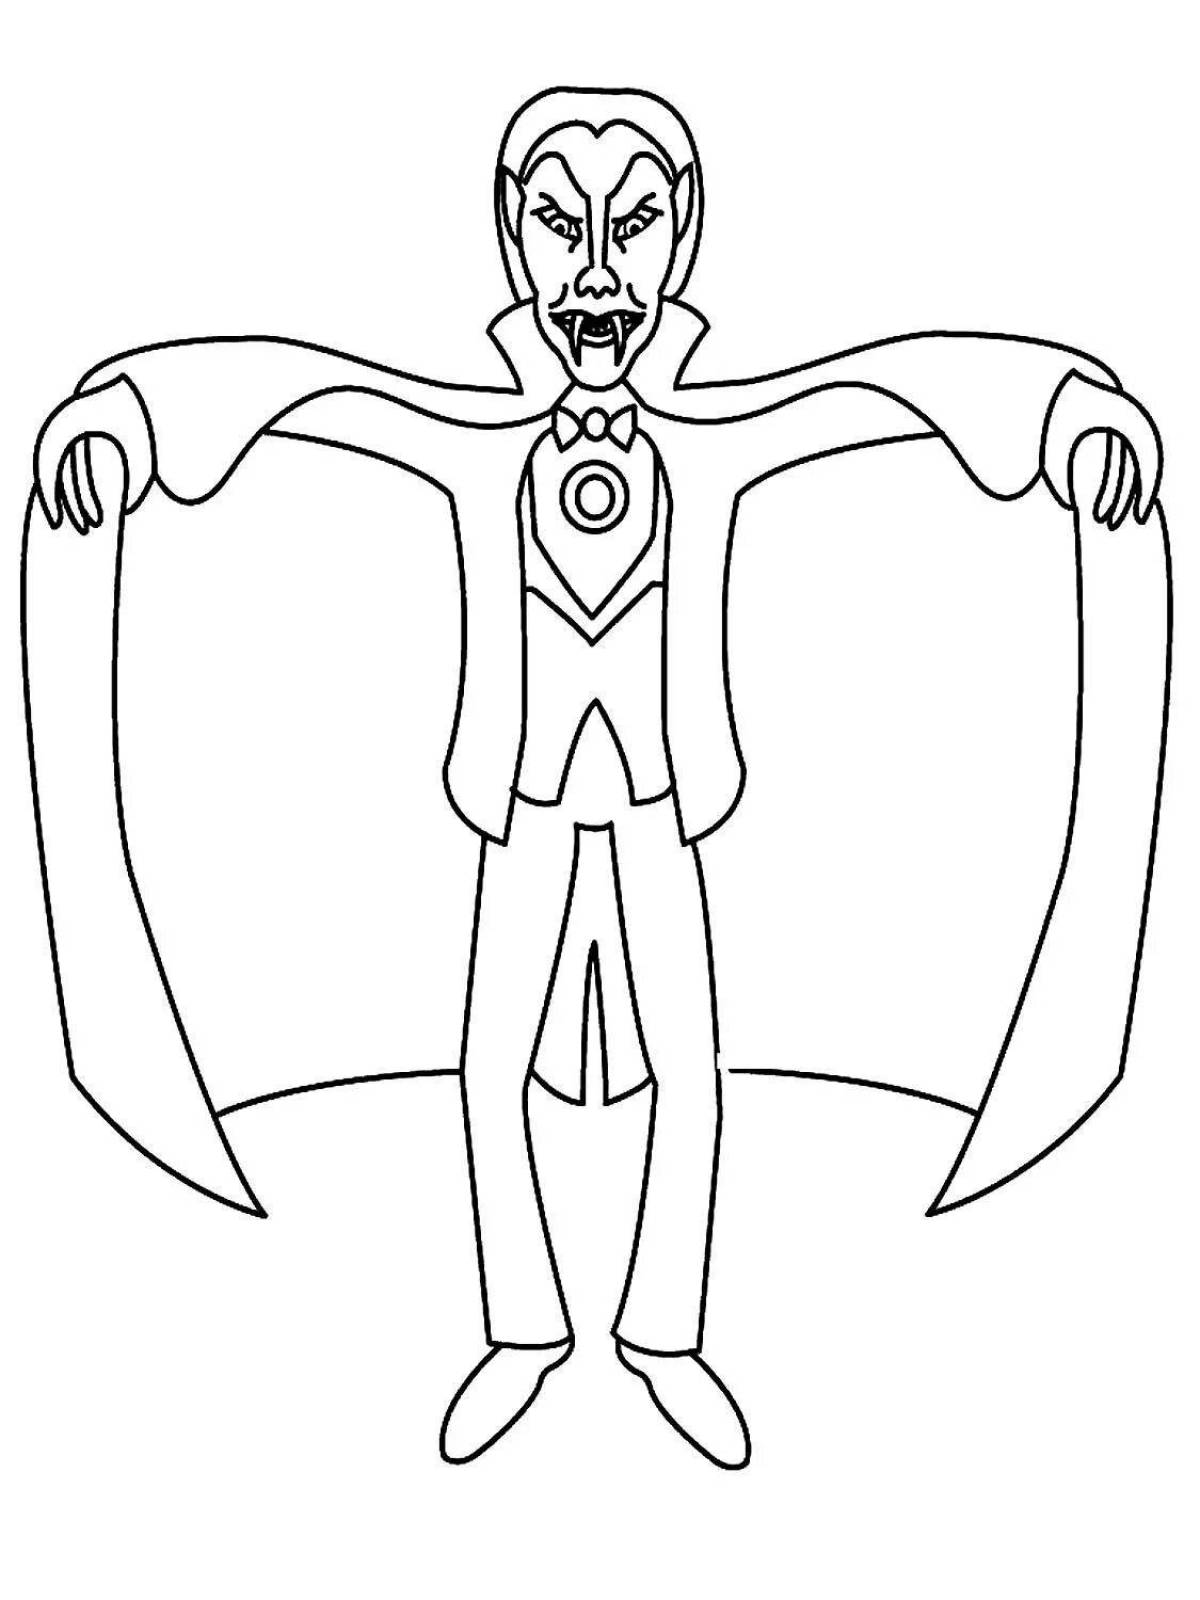 Unwanted dracula coloring page